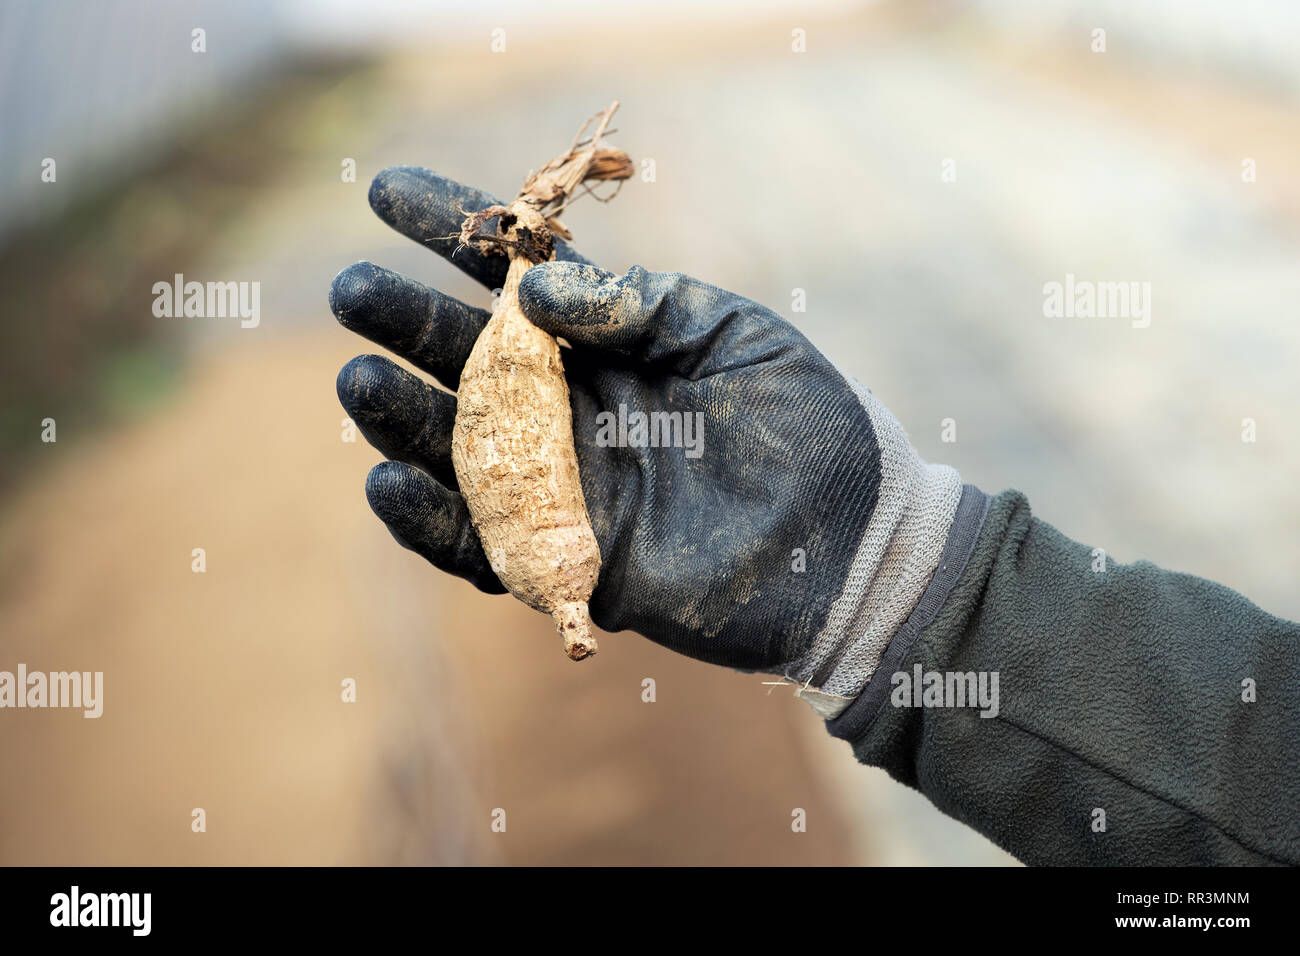 Man wearing a garden glove holding a dahlia bulb on display to the camera outdoors in the back yard Stock Photo